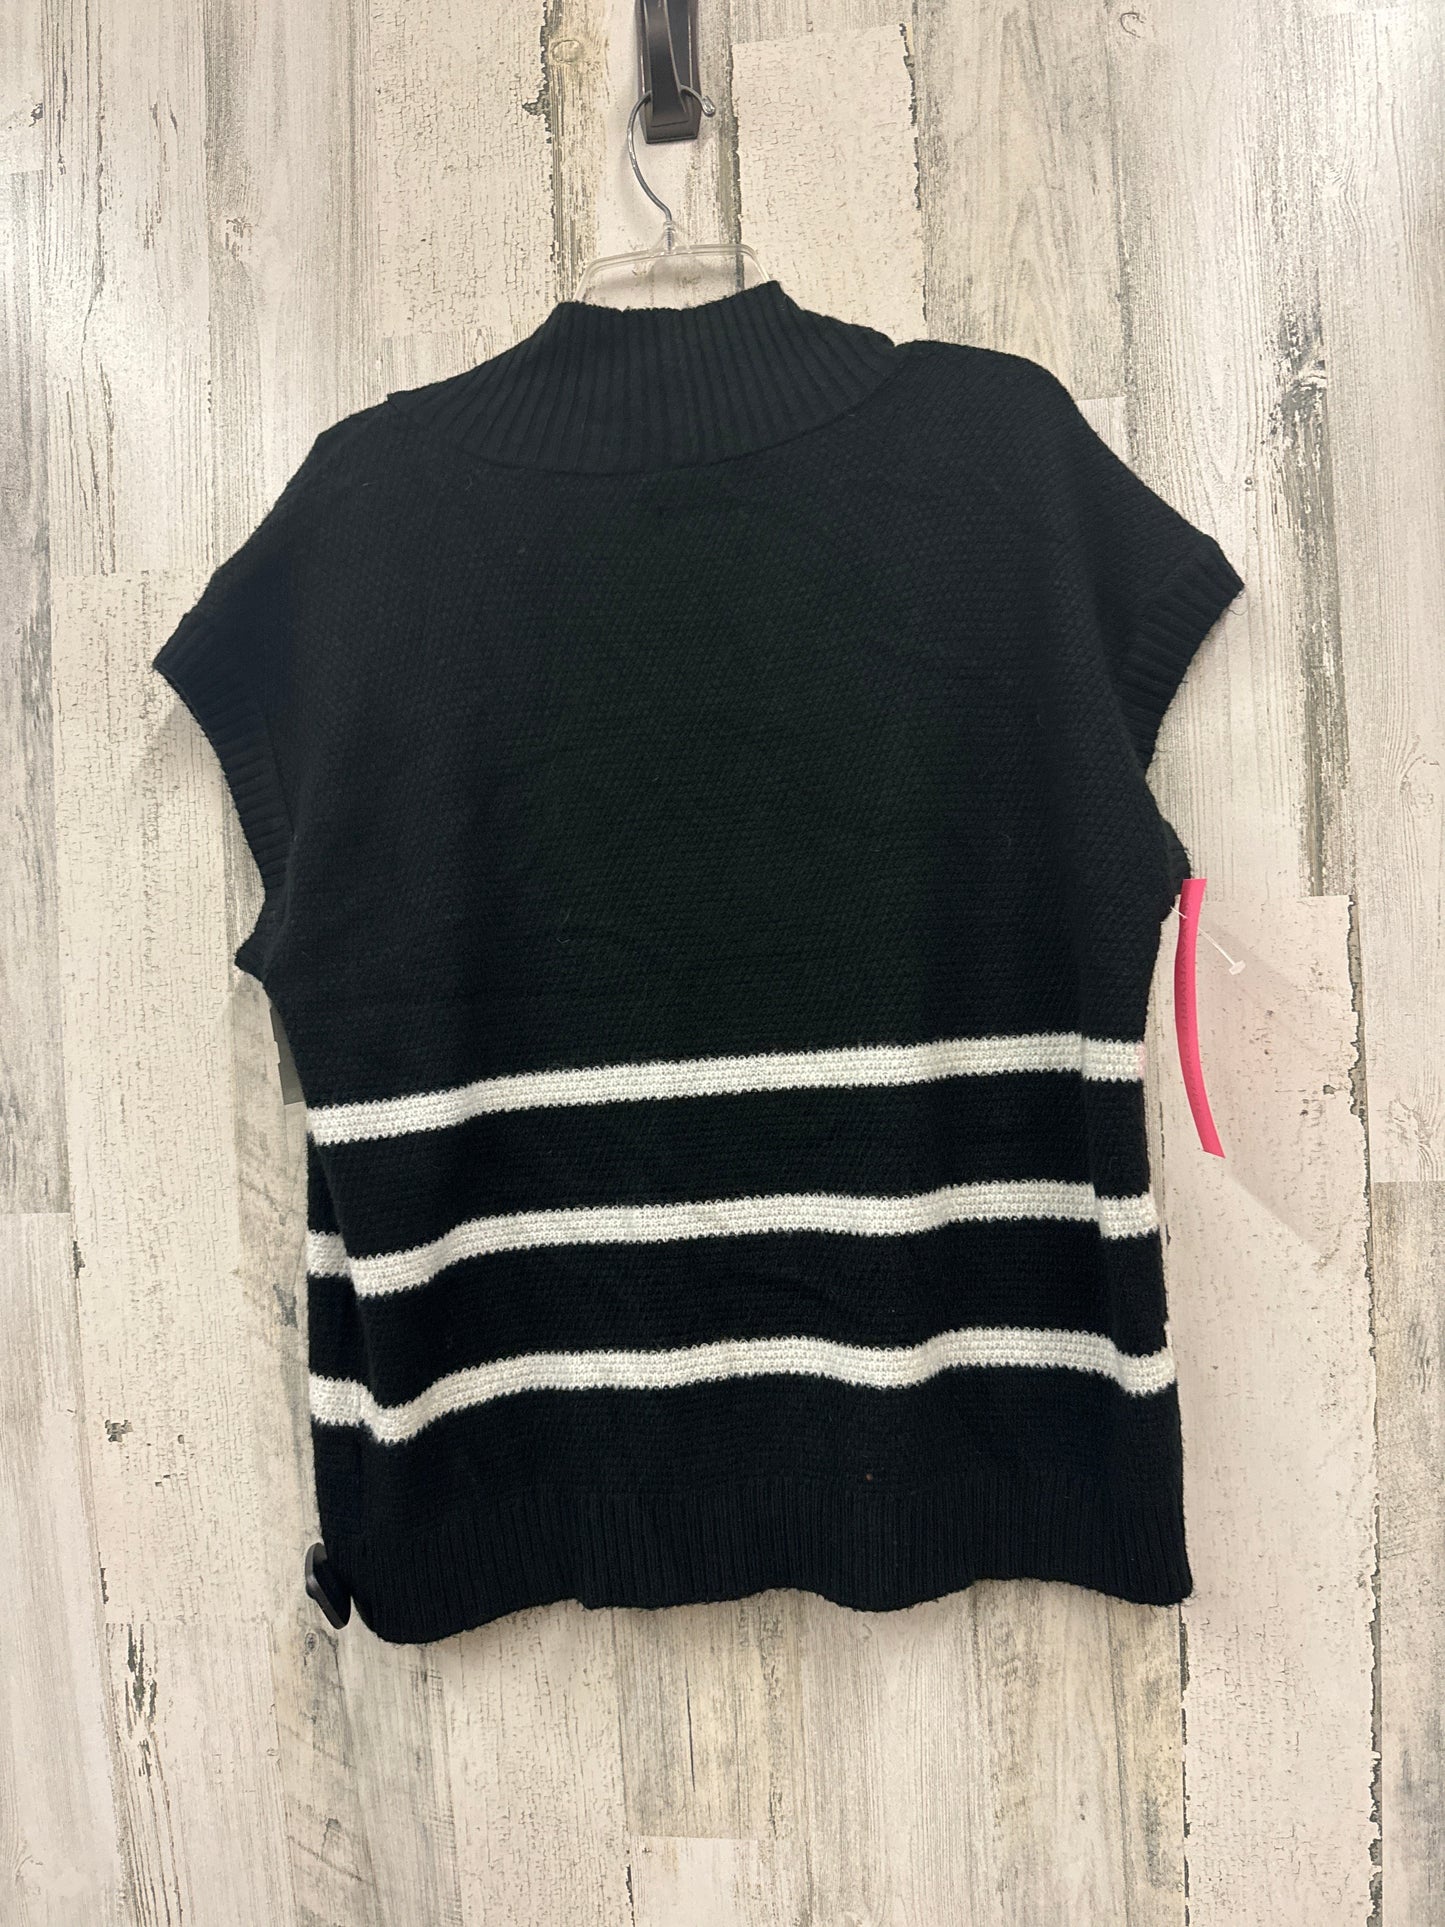 Sweater Short Sleeve By Maeve  Size: M